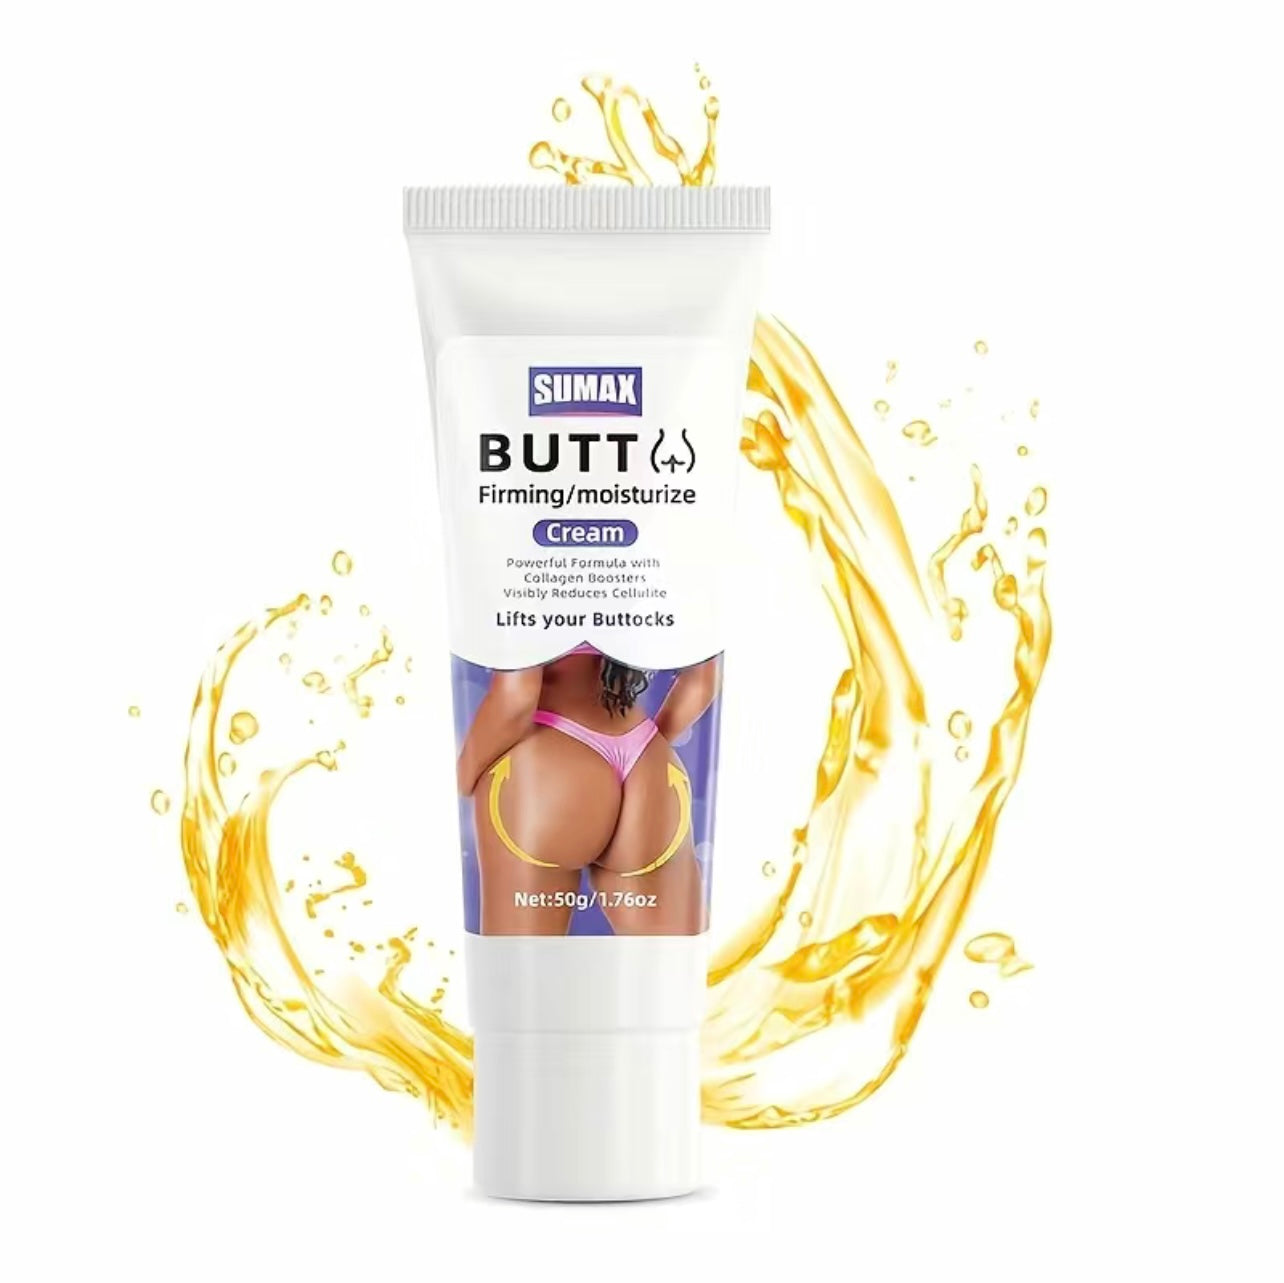 Premium Salon Quality- Buttocks Firming, Lifting, Toning & Plumping Cream. Womens beauty and skincare, reduce buttocks cellulite, skin tightening cream, skin firming cream, buttocks lifting cream, bbl cream, butt lifting cream, butt firming cream, tighten buttocks